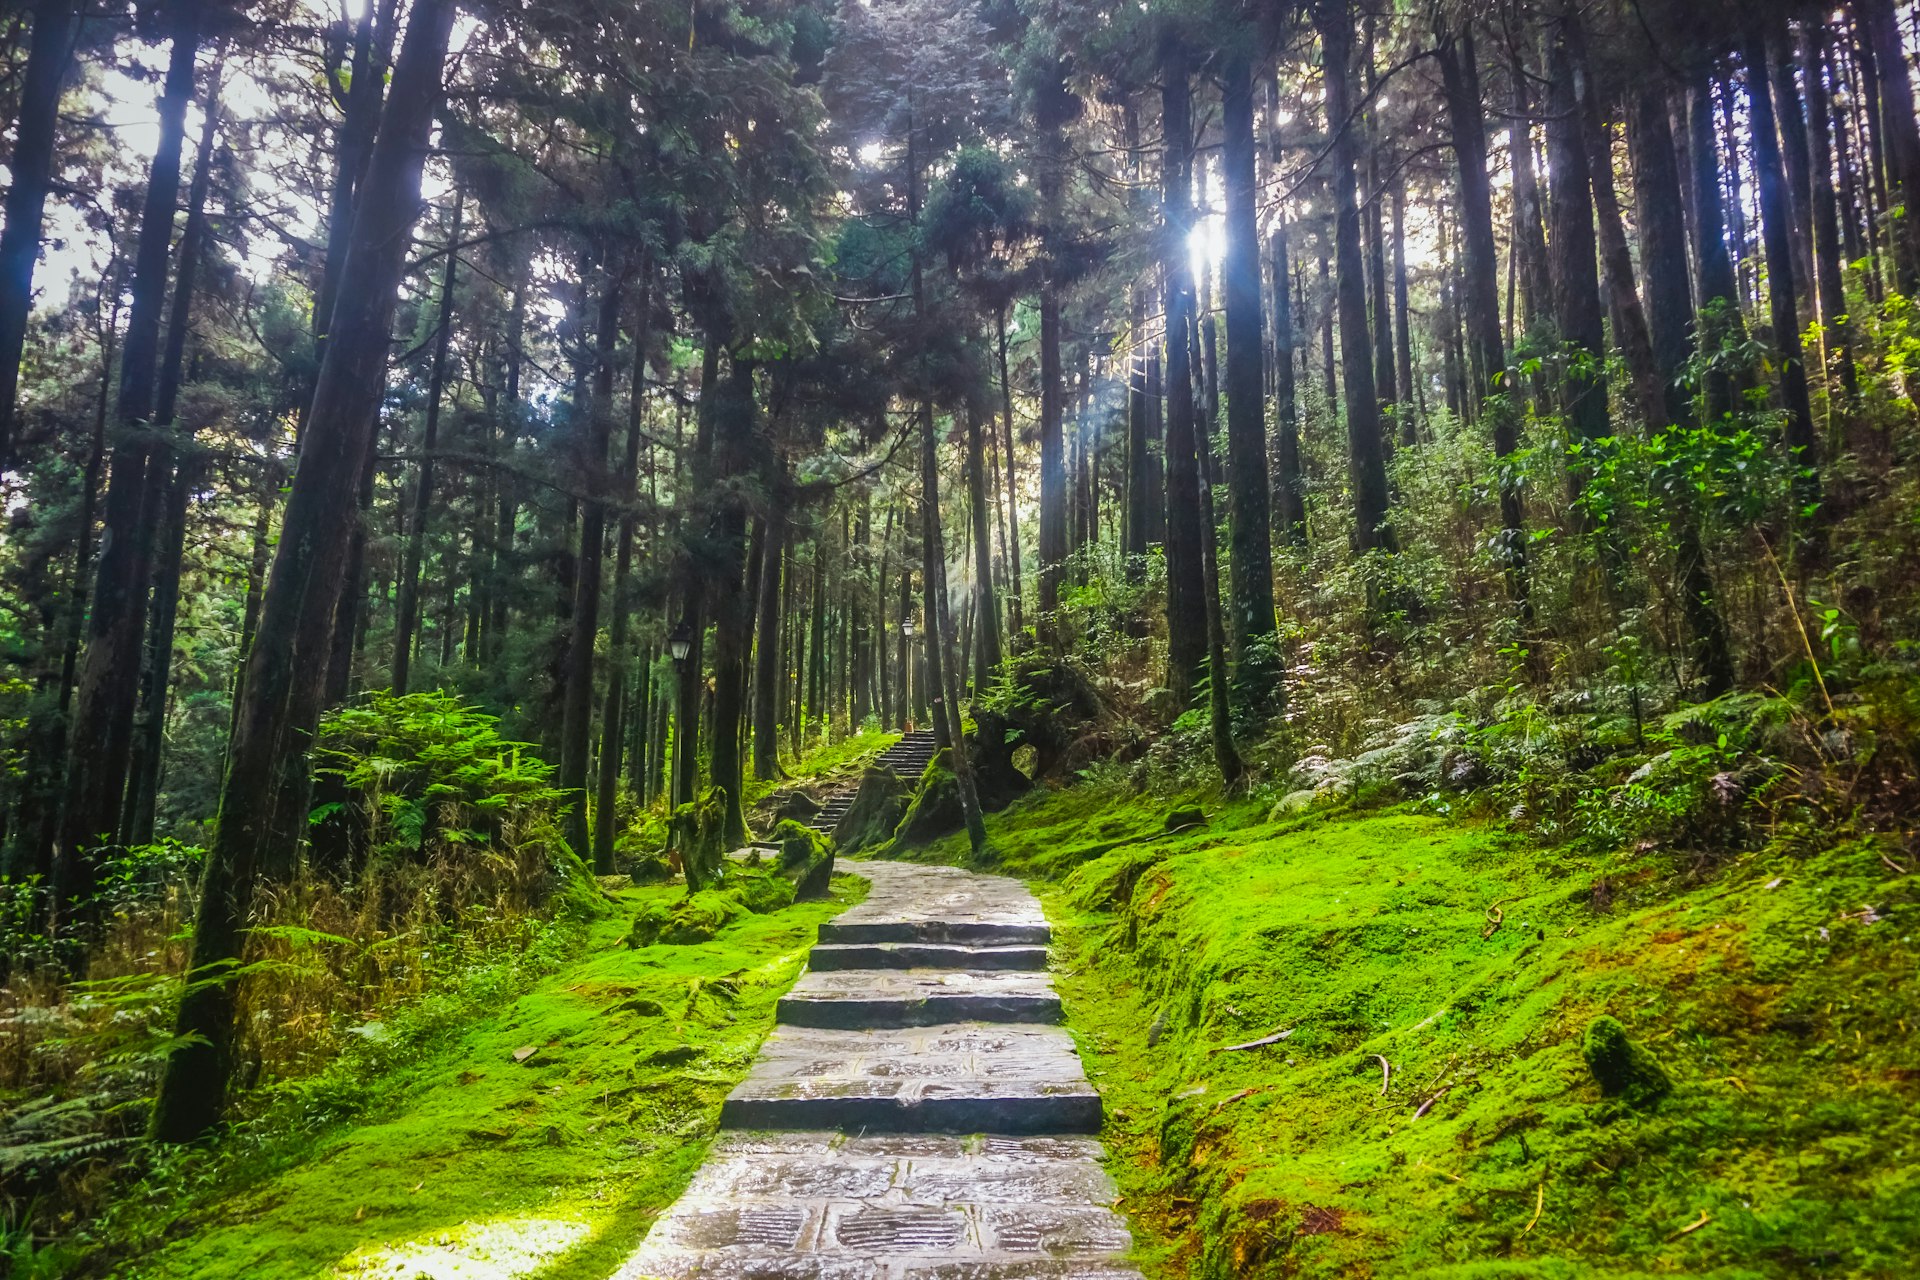 A paved path through moss-covered ground and tall trees with a ray of sunshine shining through